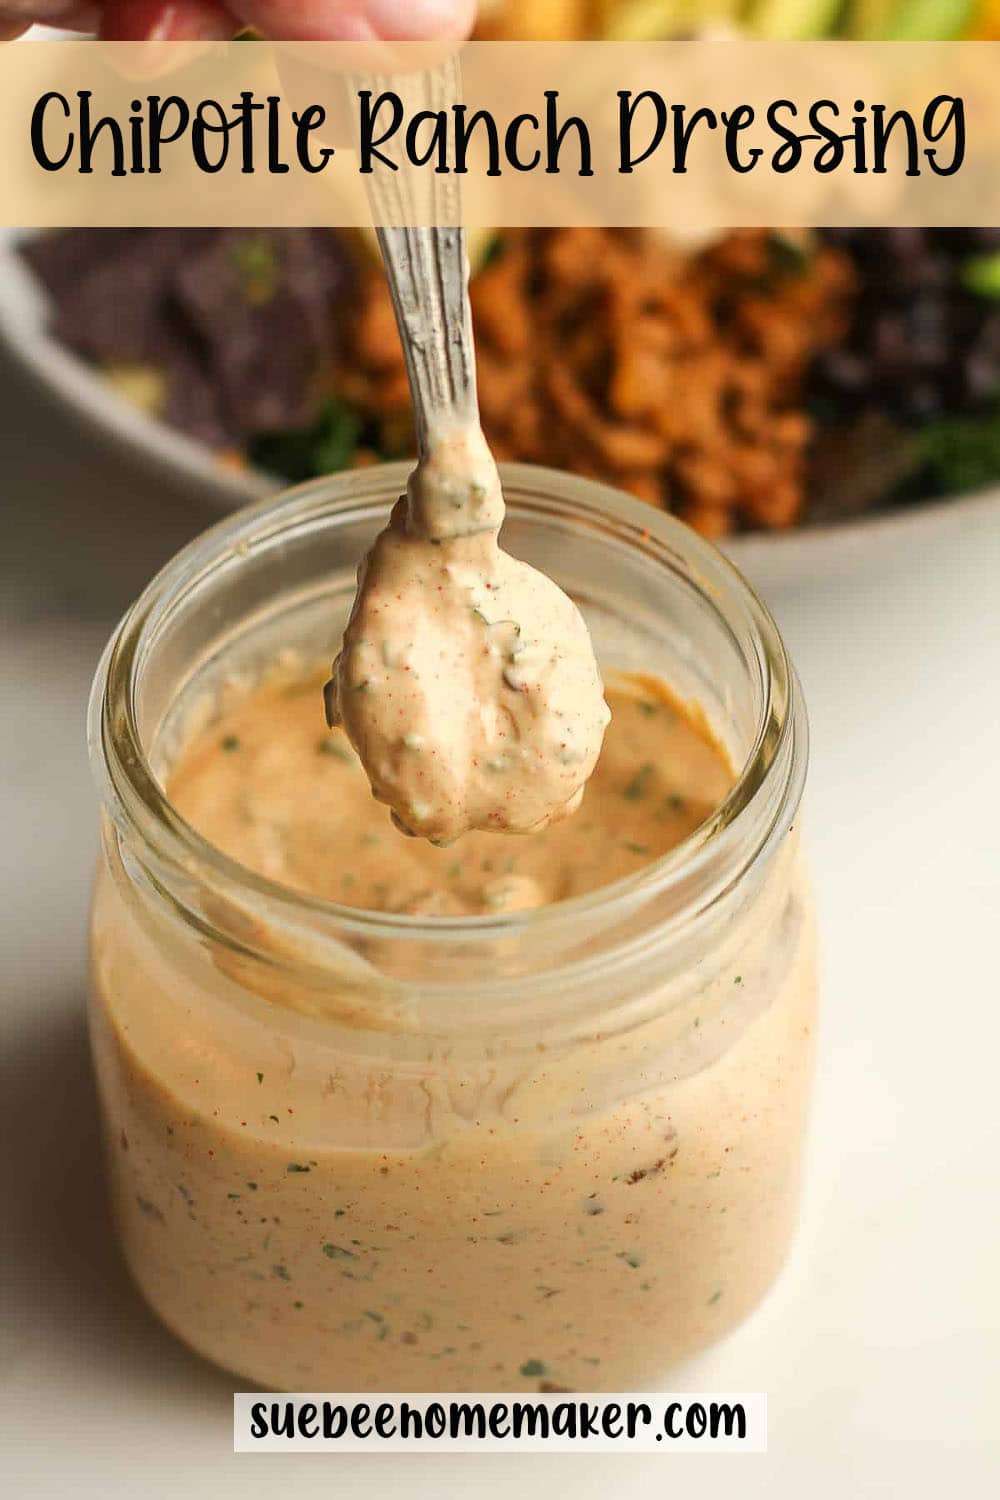 A jar of chipotle ranch dressing.